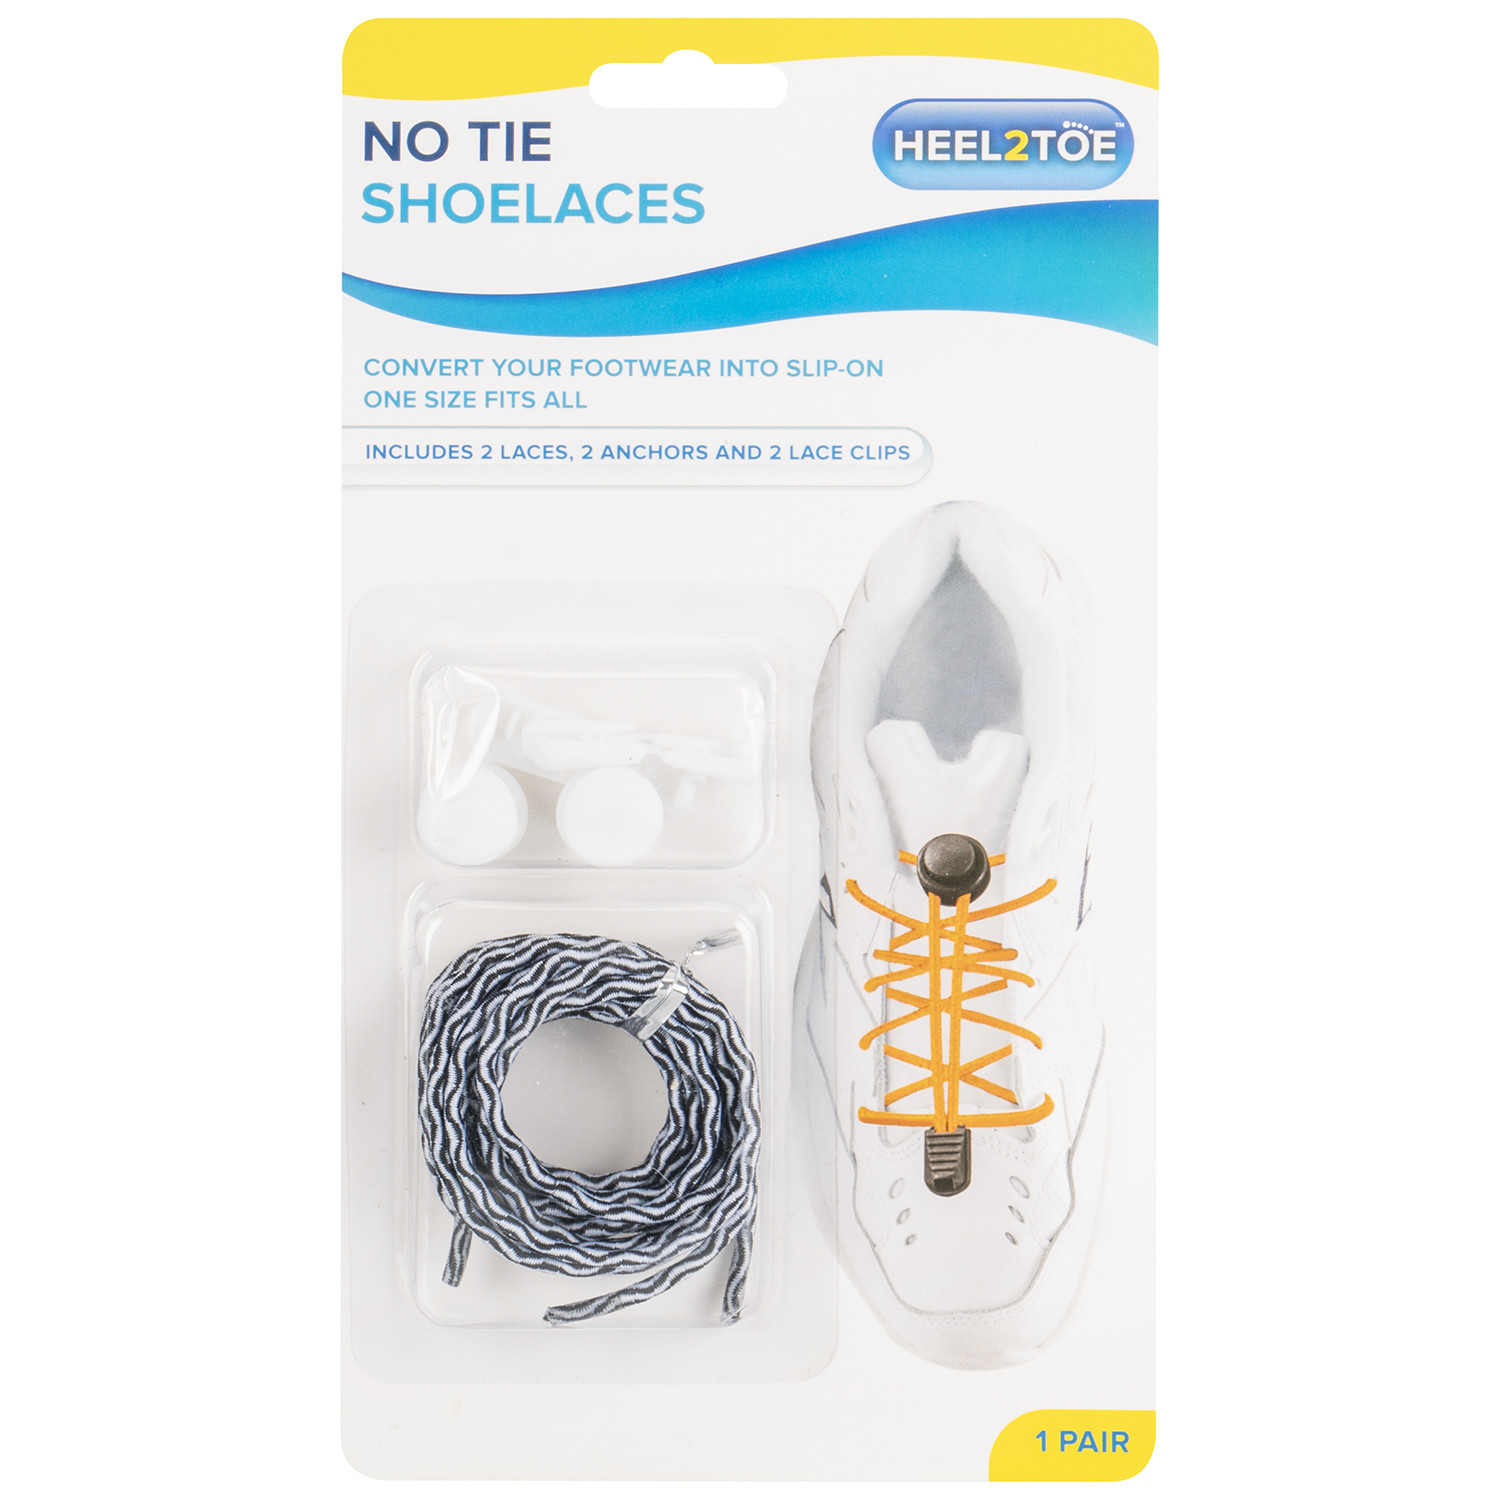 No Tie Shoe Laces With Anchors and Clips Image 3